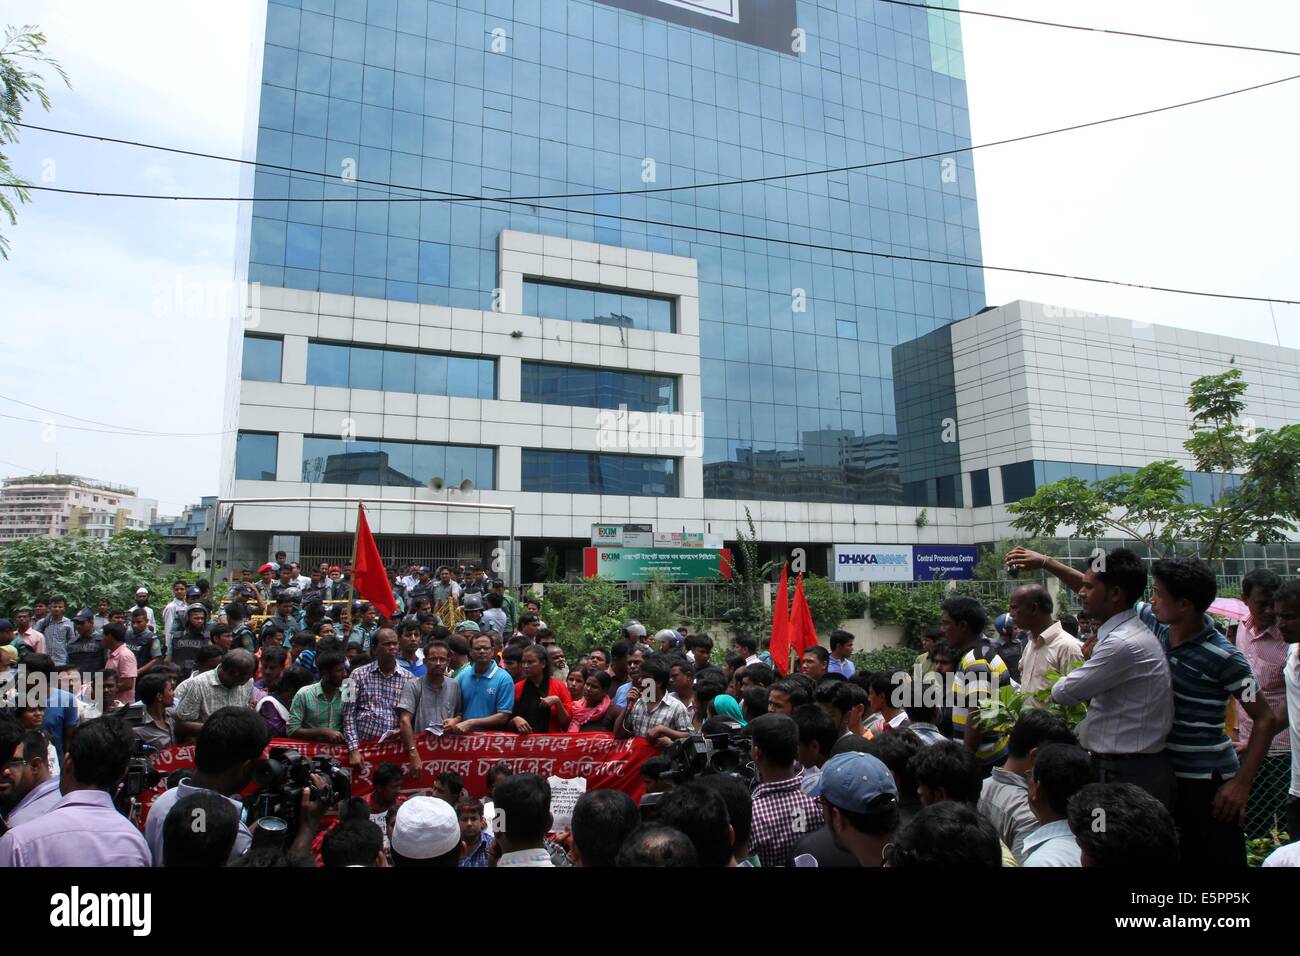 Dhaka, Bangladesh. 5th Aug, 2014. Police resist demonstrating workers of Tuba Group in front of the building of Bangladesh Garment Manufacturers and Exporters Association (BGMEA) at Karwan Bazar in Dhaka. The workers go to lay siege to the BGMEA building demanding three-month salaries and Eid bonus. Stock Photo